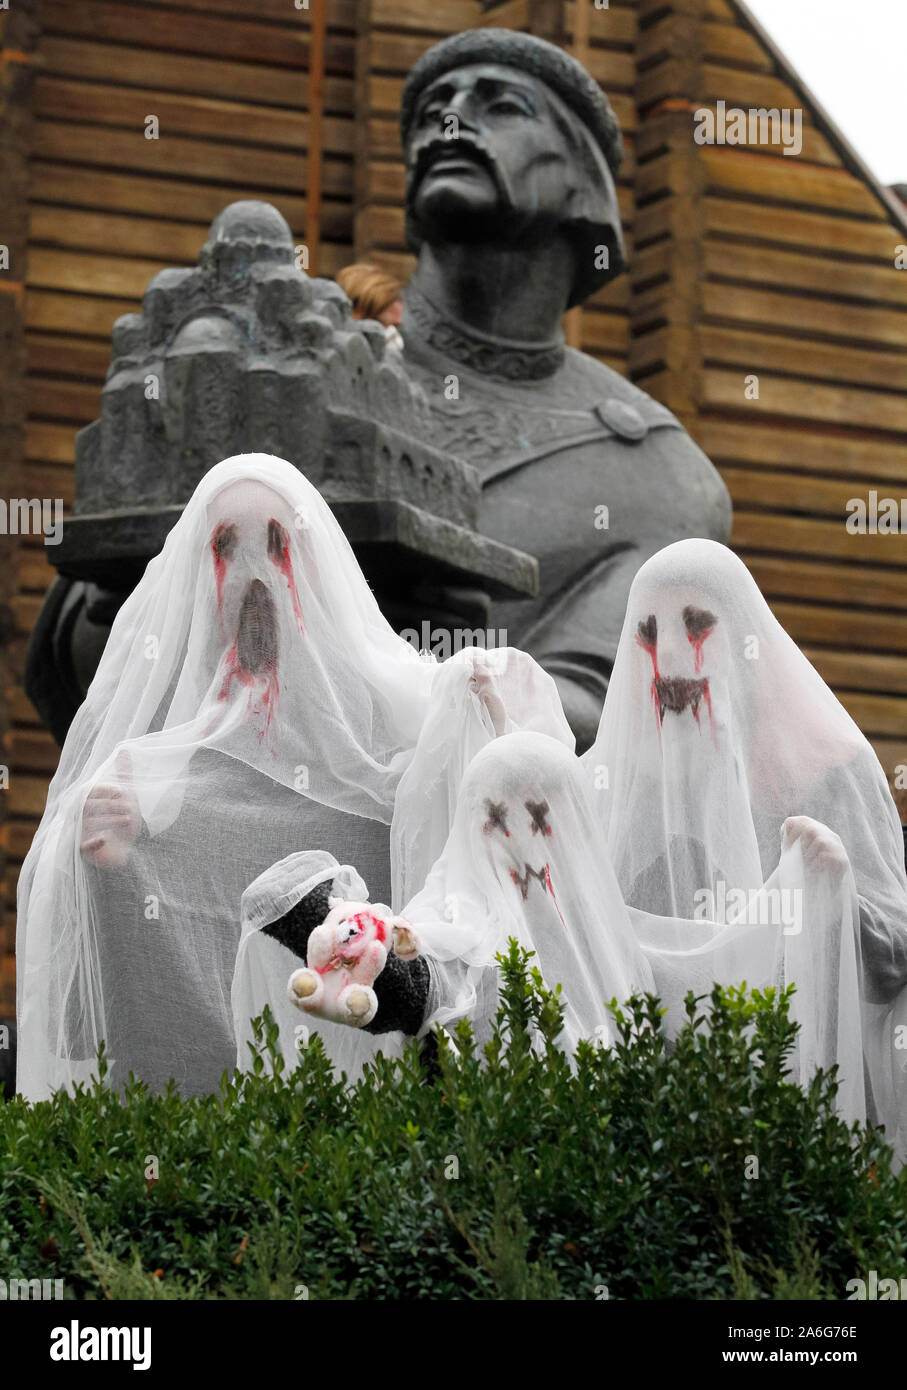 A family wearing ghost costumes attend the Zombie Walk in Kiev.Hundreds of zombies staggered through the inner city in search of fresh brains during the Halloween Parade. Halloween is a holiday celebrated in the world on 31 October, the eve of the Western Christian feast of All Hallows' Day in which participants attend the Halloween costume parties, carving pumpkins into jack-o'-lanterns, lighting bonfires, apple bobbing, playing pranks, tell scary stories and watch horror films. Stock Photo